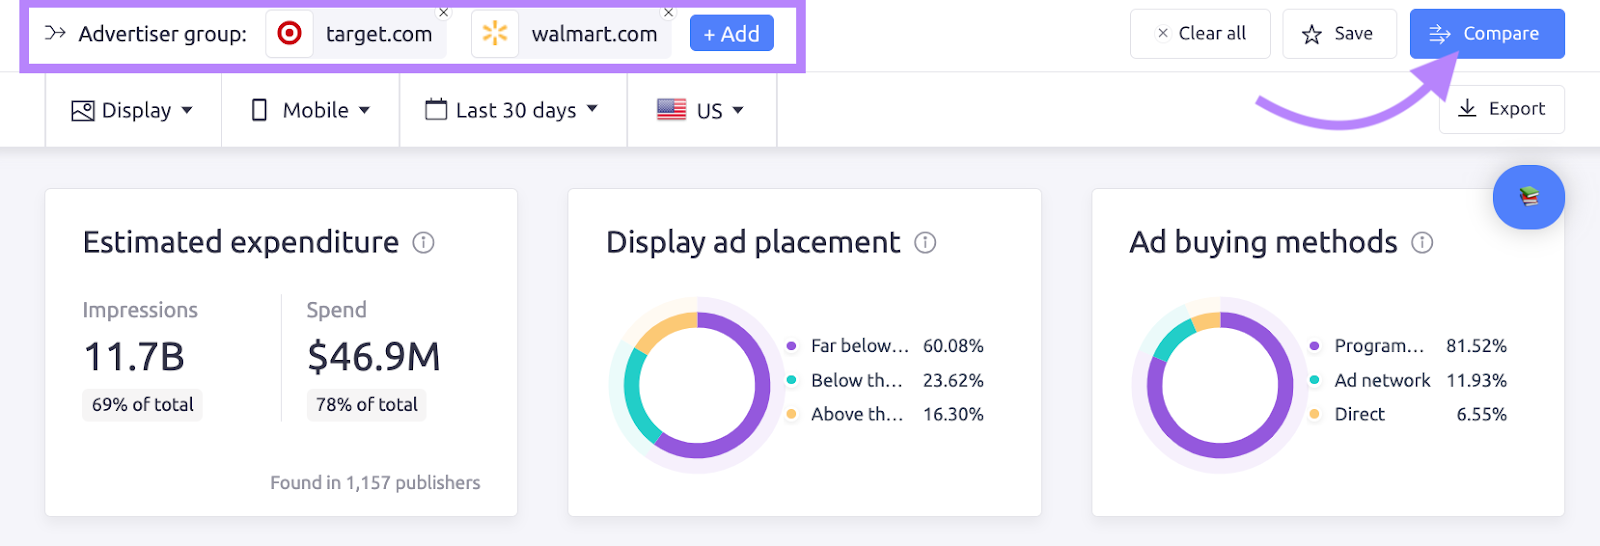 AdClarity's dashboard comparing "target.com," and "walmart.com"